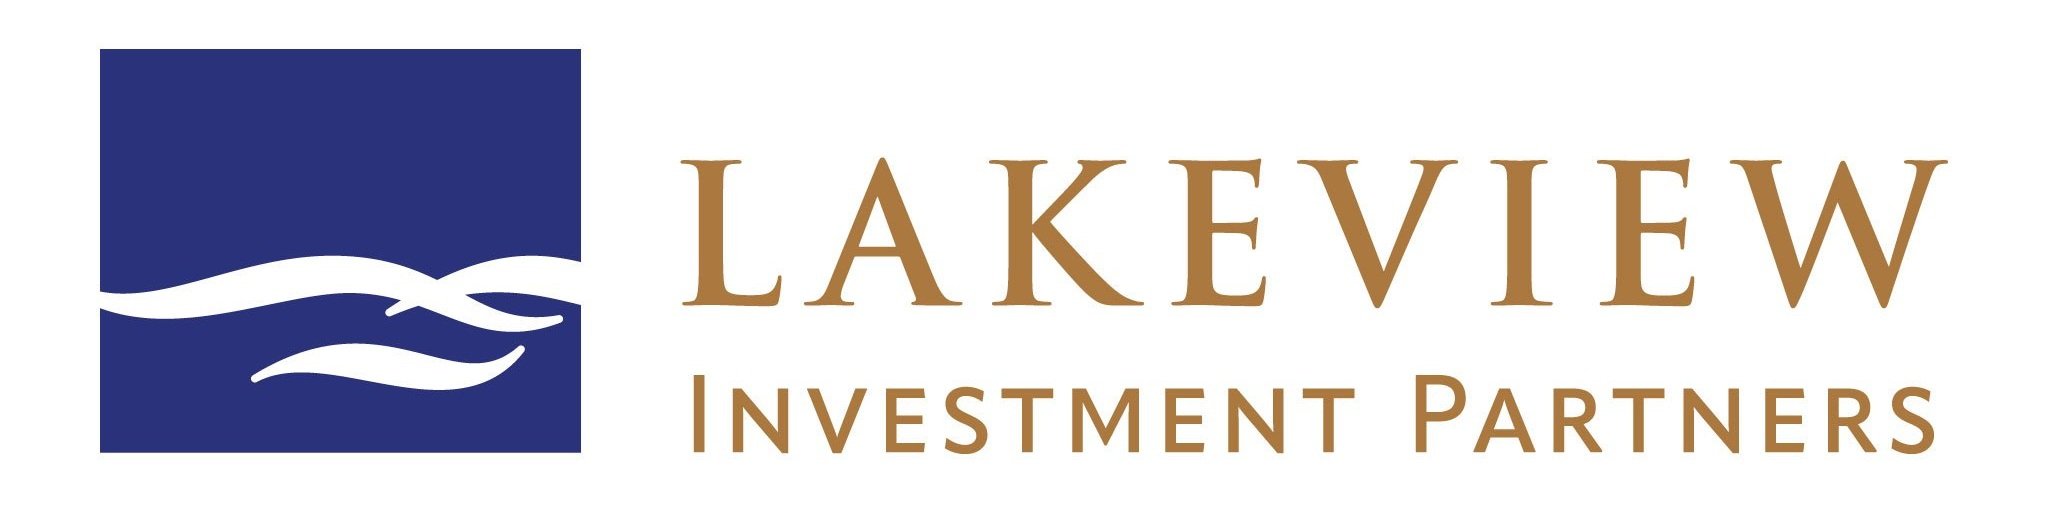 Lakeview Investment Partners LLC